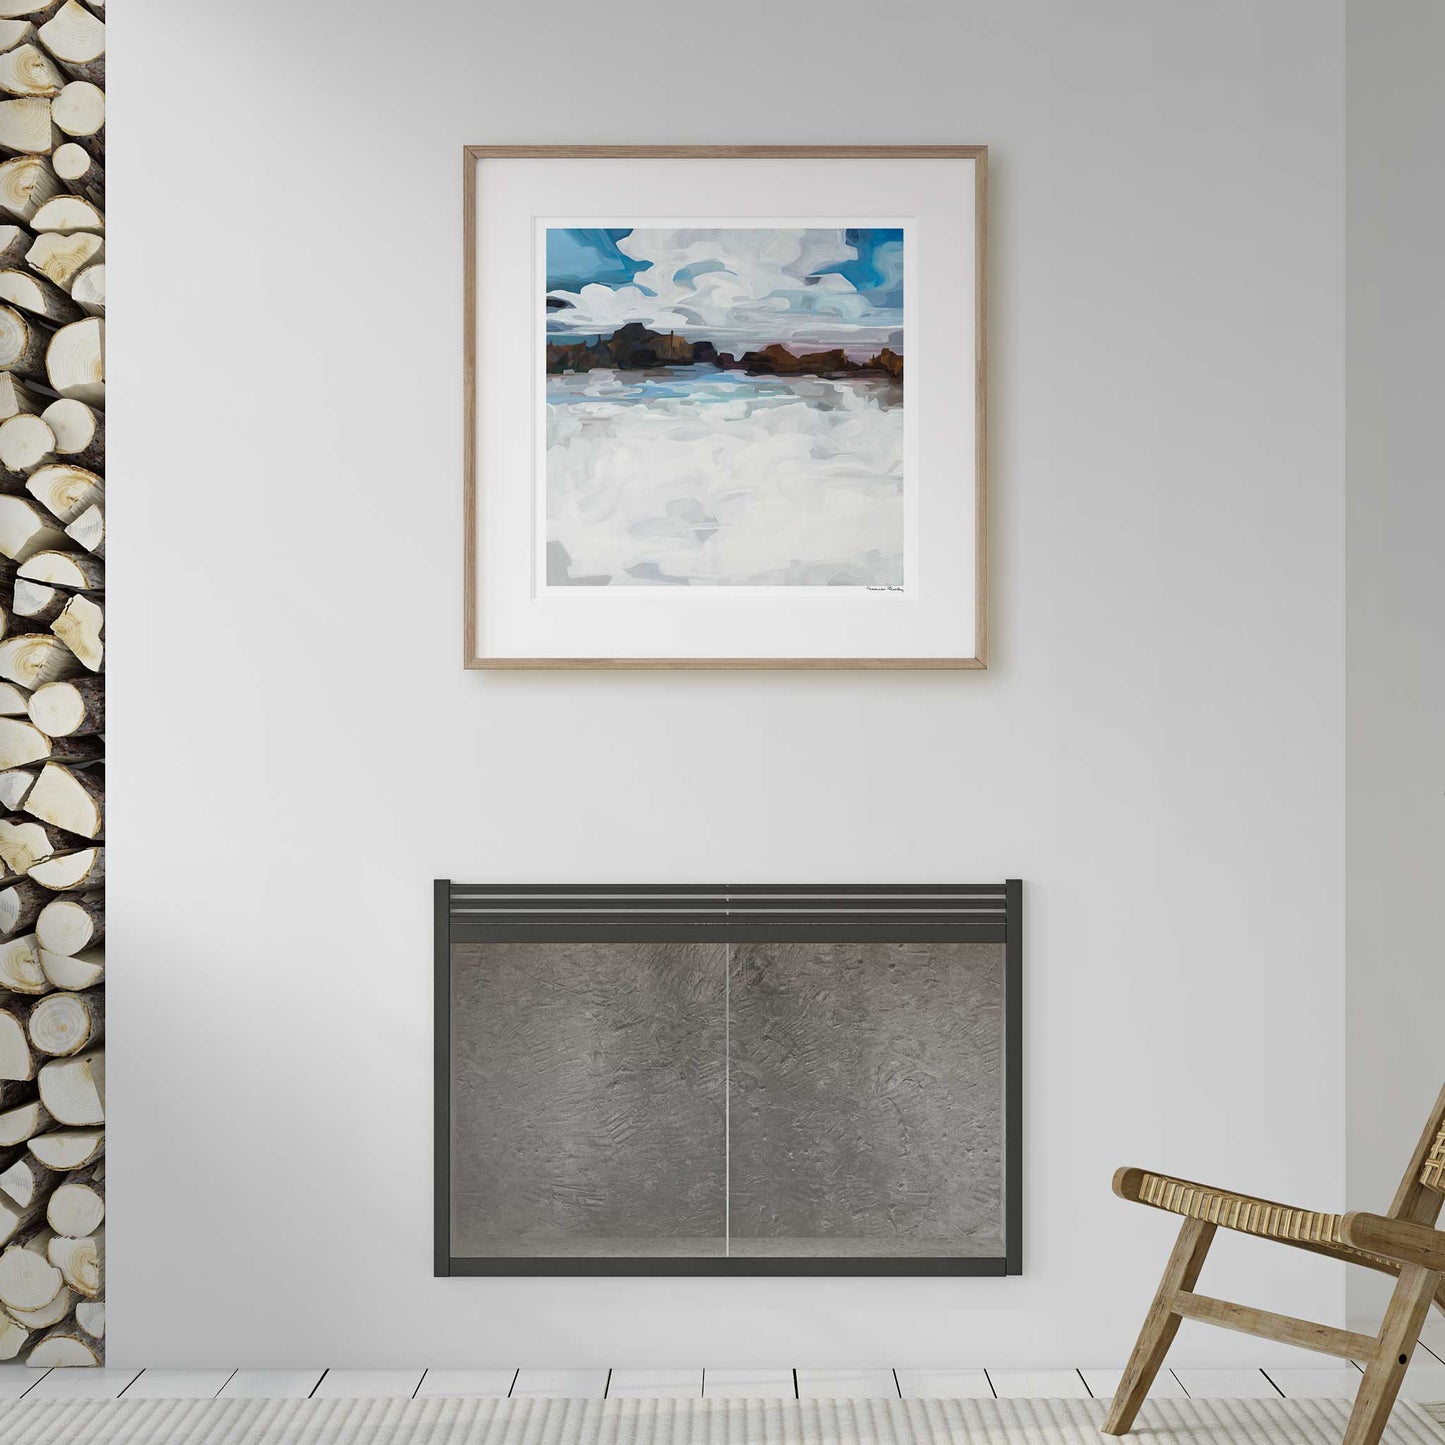 large square art print hanging over fireplace with framed winter abstract landscape in white room